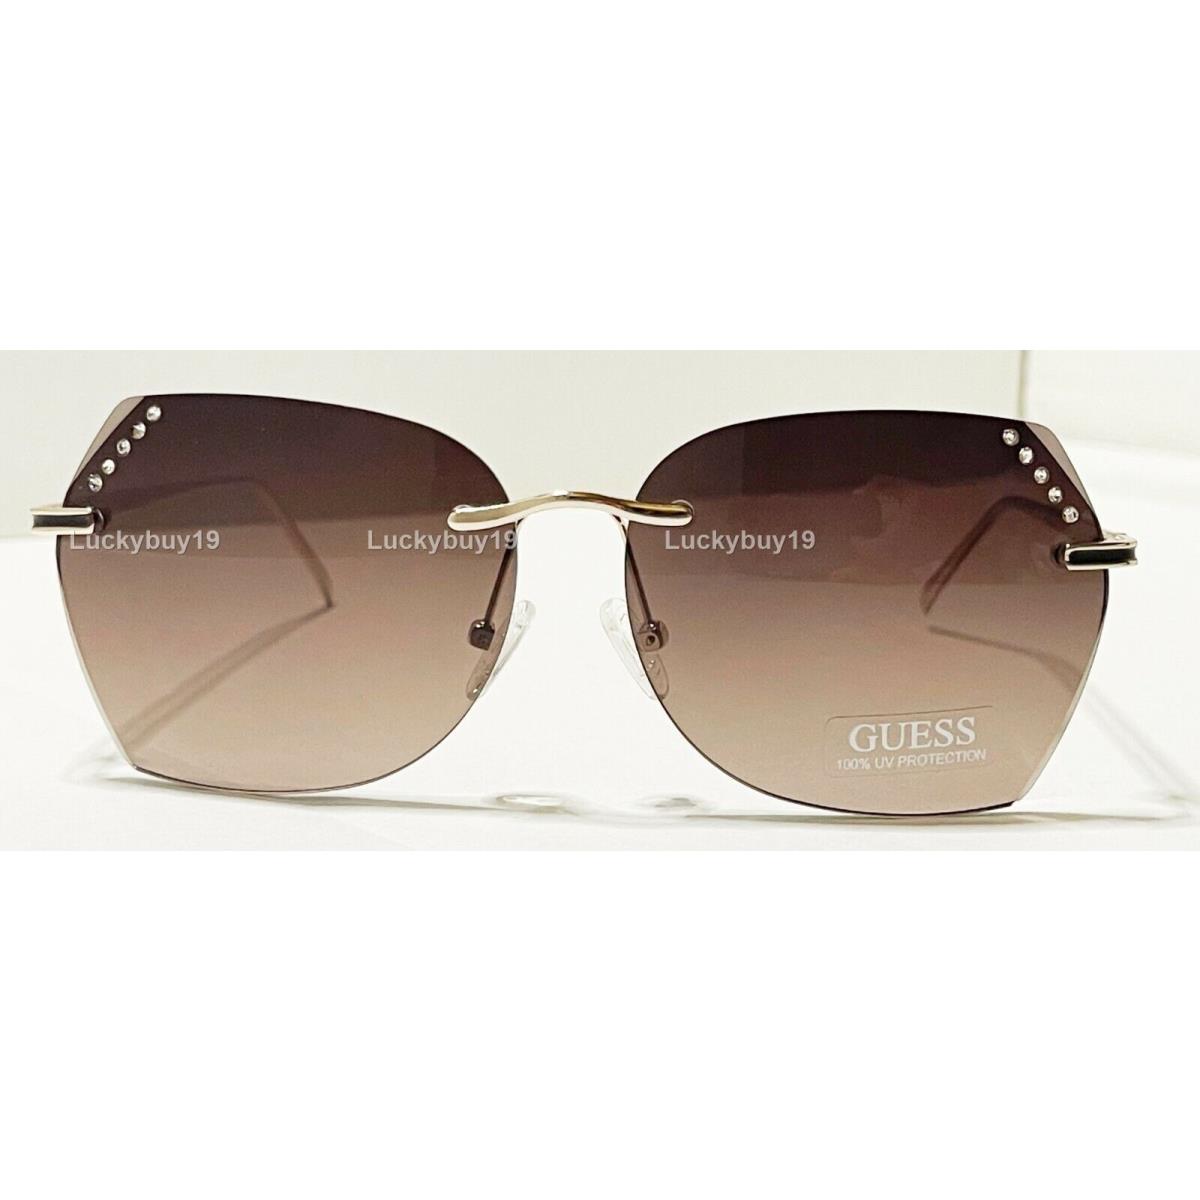 Guess sunglasses  - Gold Frame, Brown Lens 5